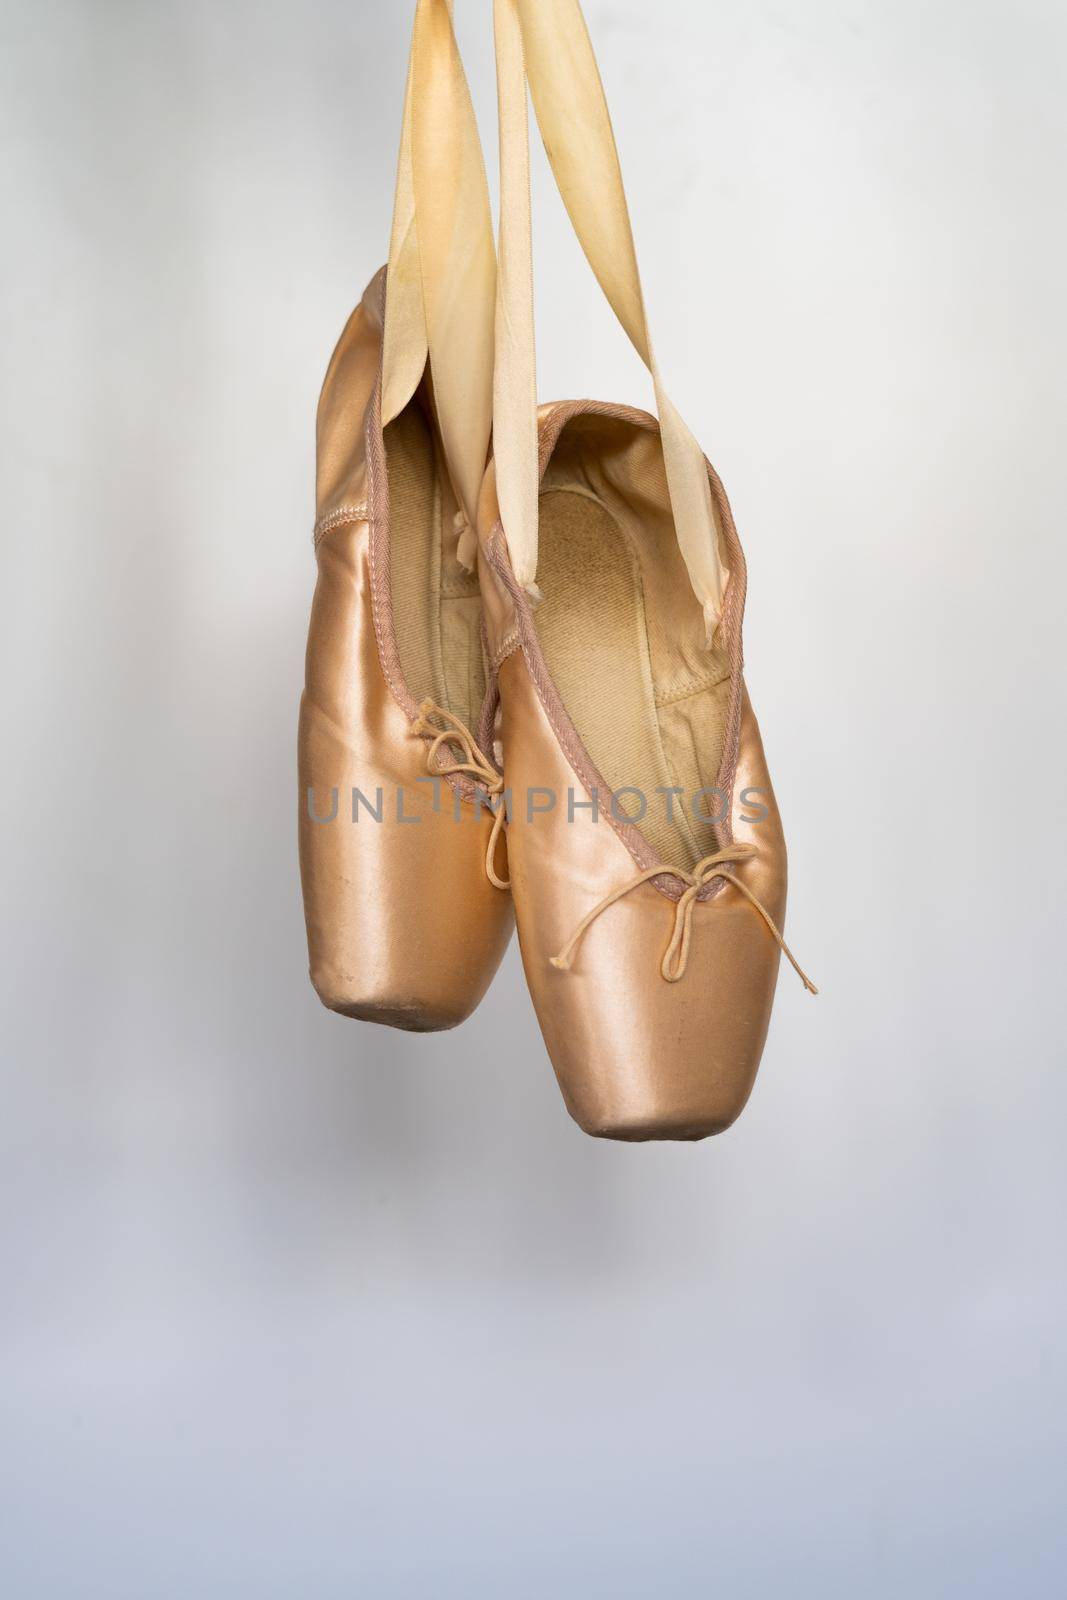 ballet slippers with orange ribbon on a wooden floor and white background